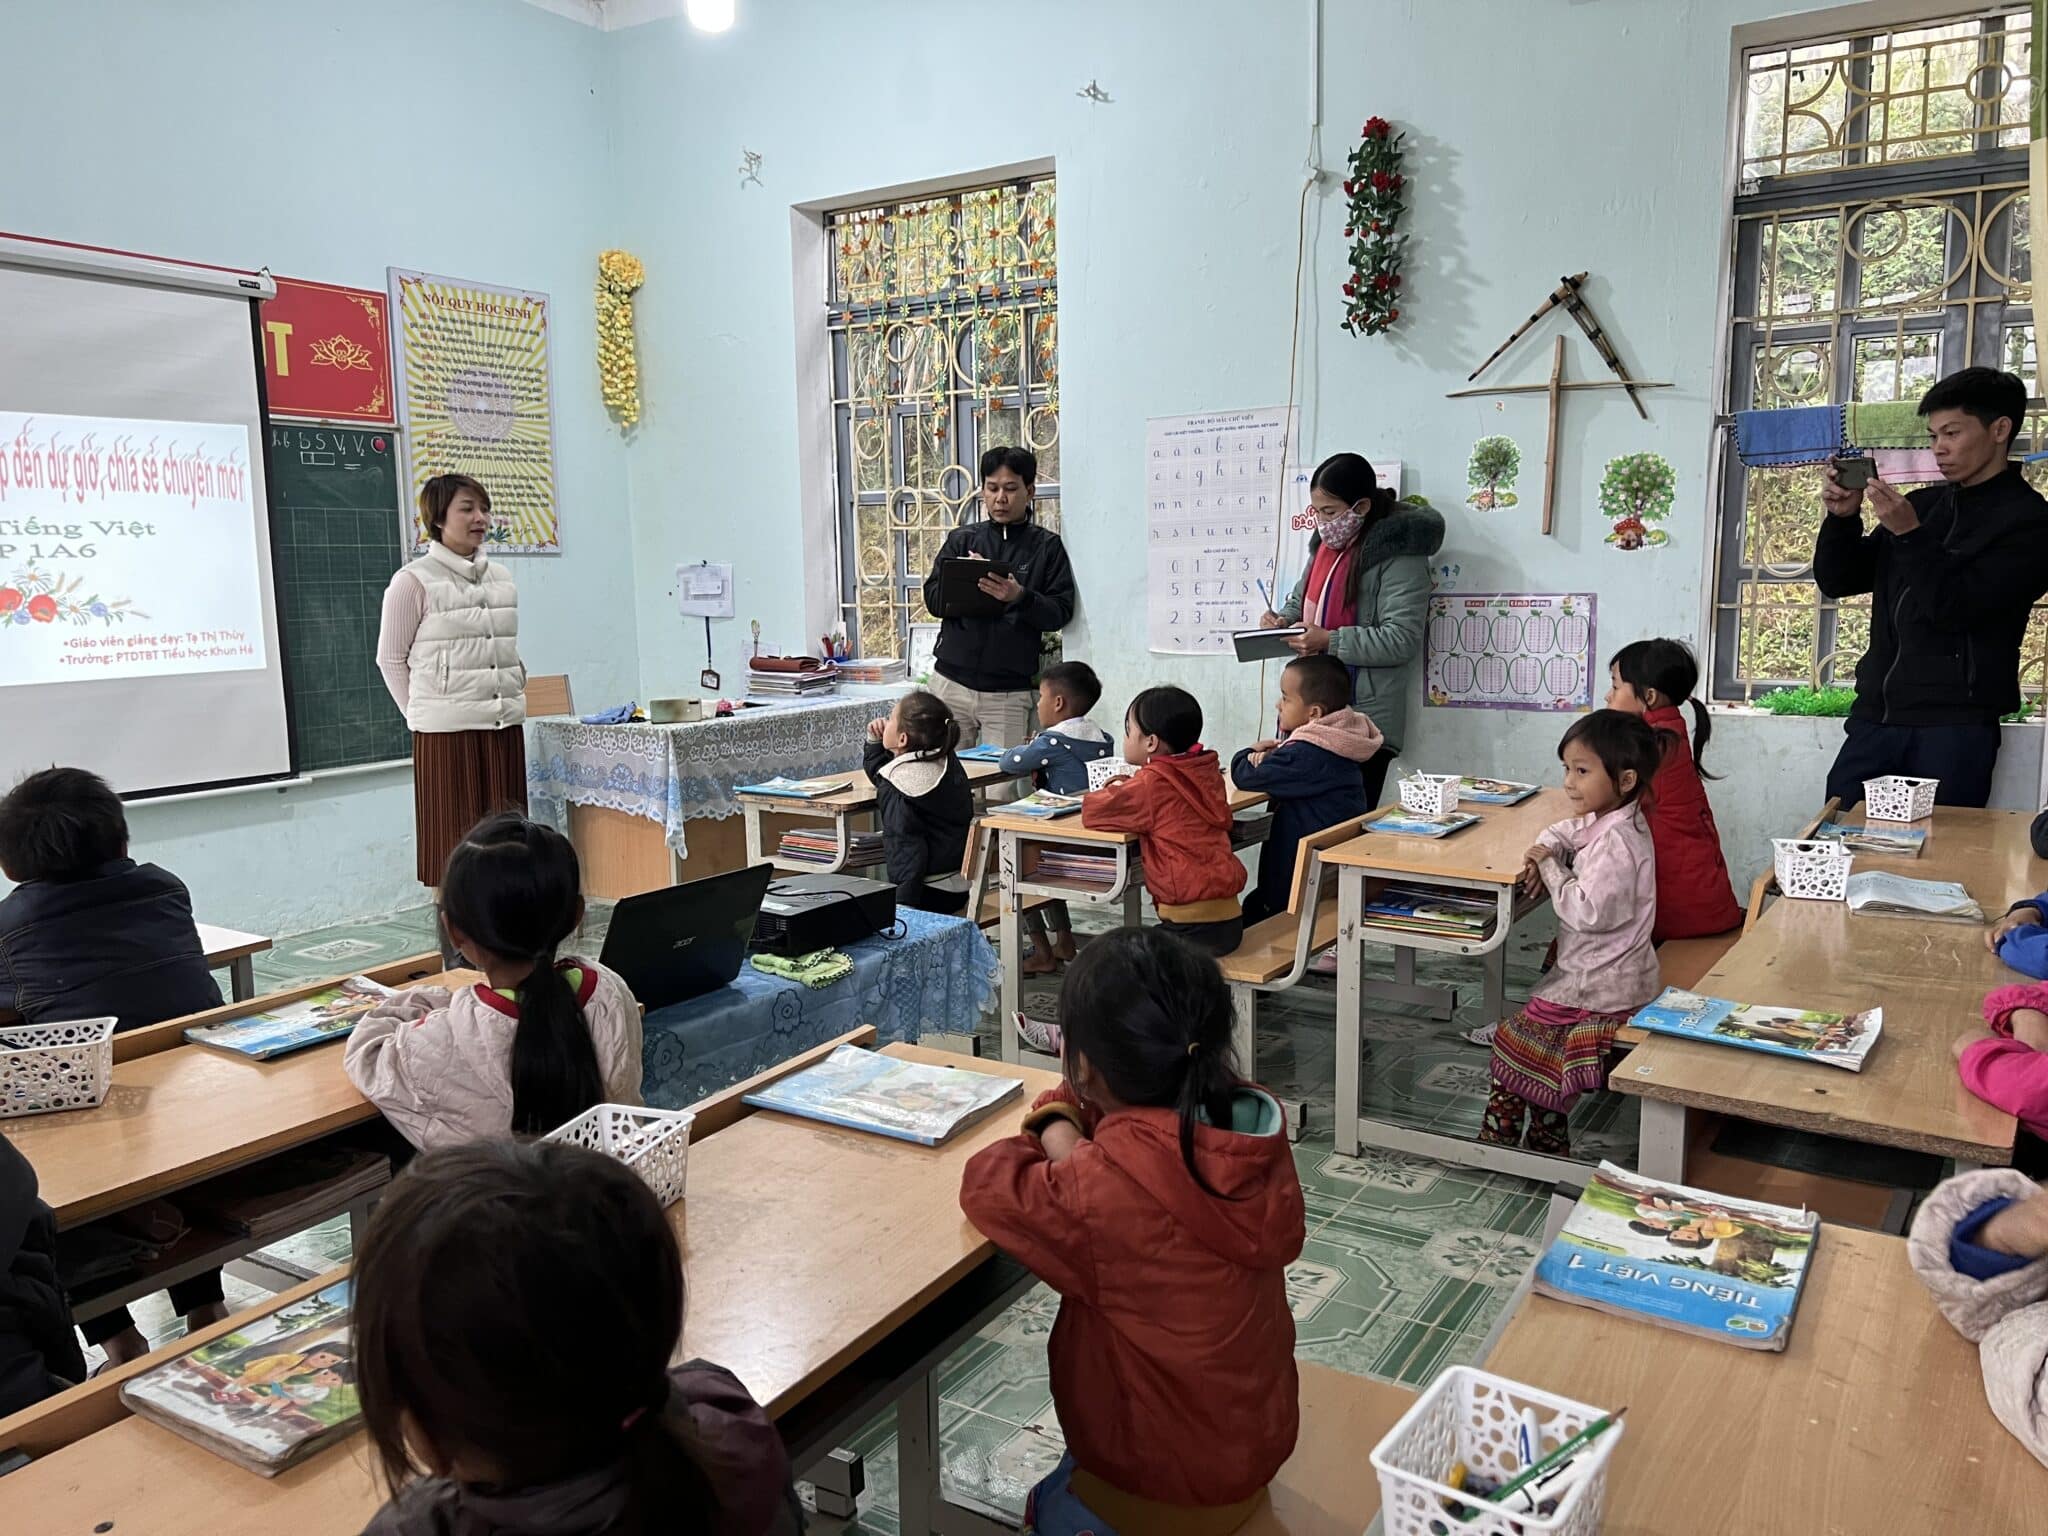 An inspiring teacher’s commitment to quality education in Vietnam